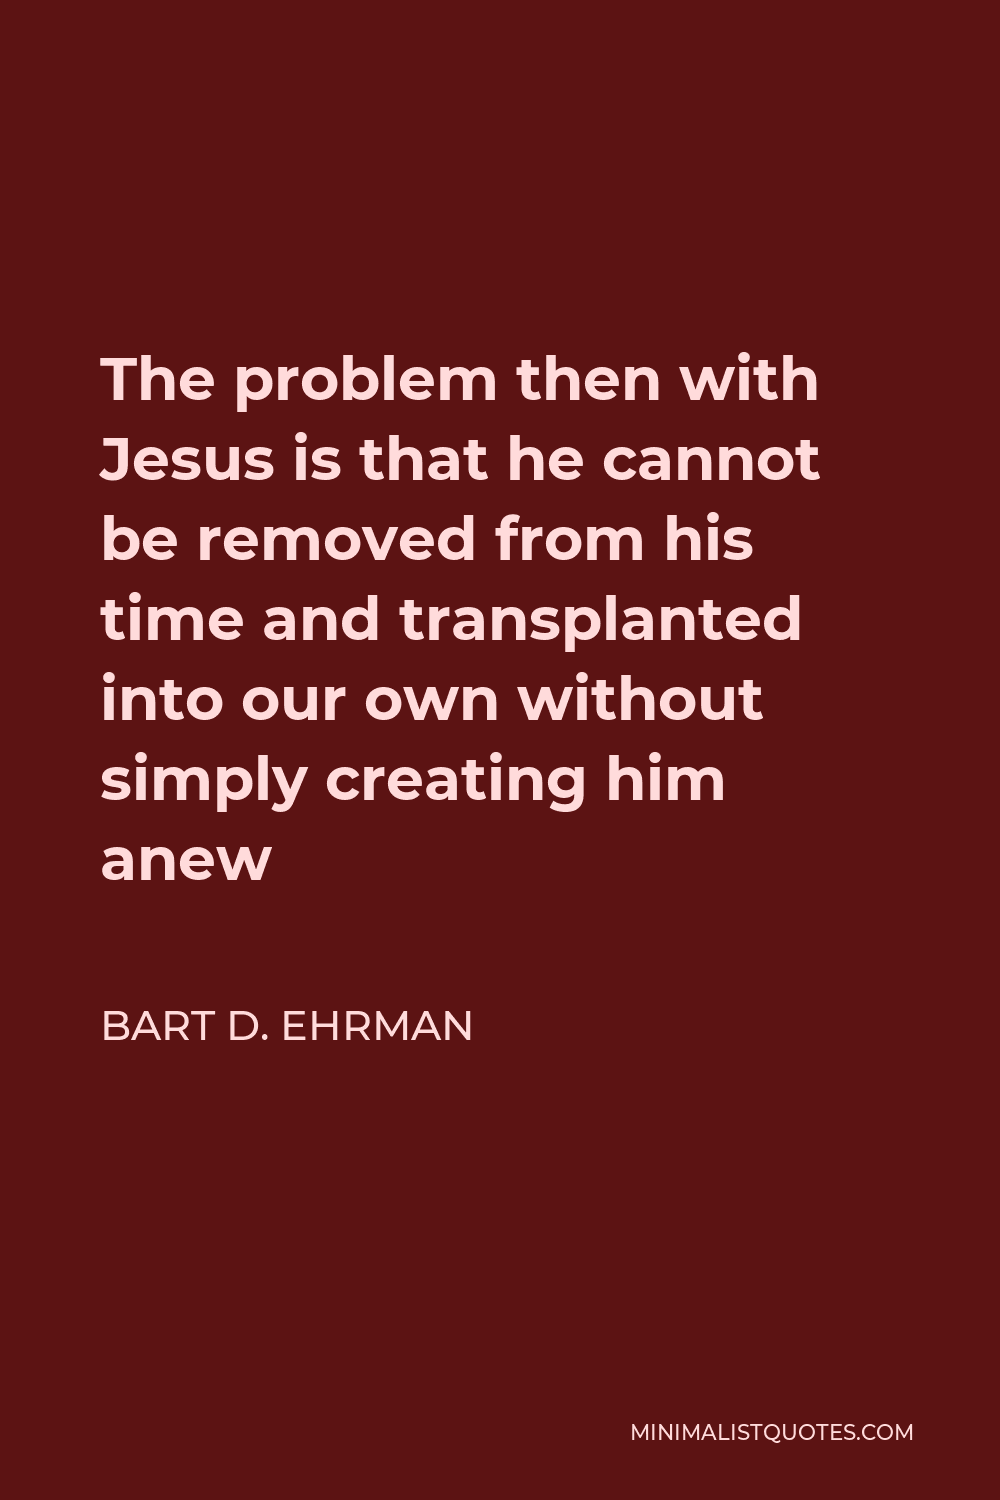 Bart D. Ehrman Quote - The problem then with Jesus is that he cannot be removed from his time and transplanted into our own without simply creating him anew